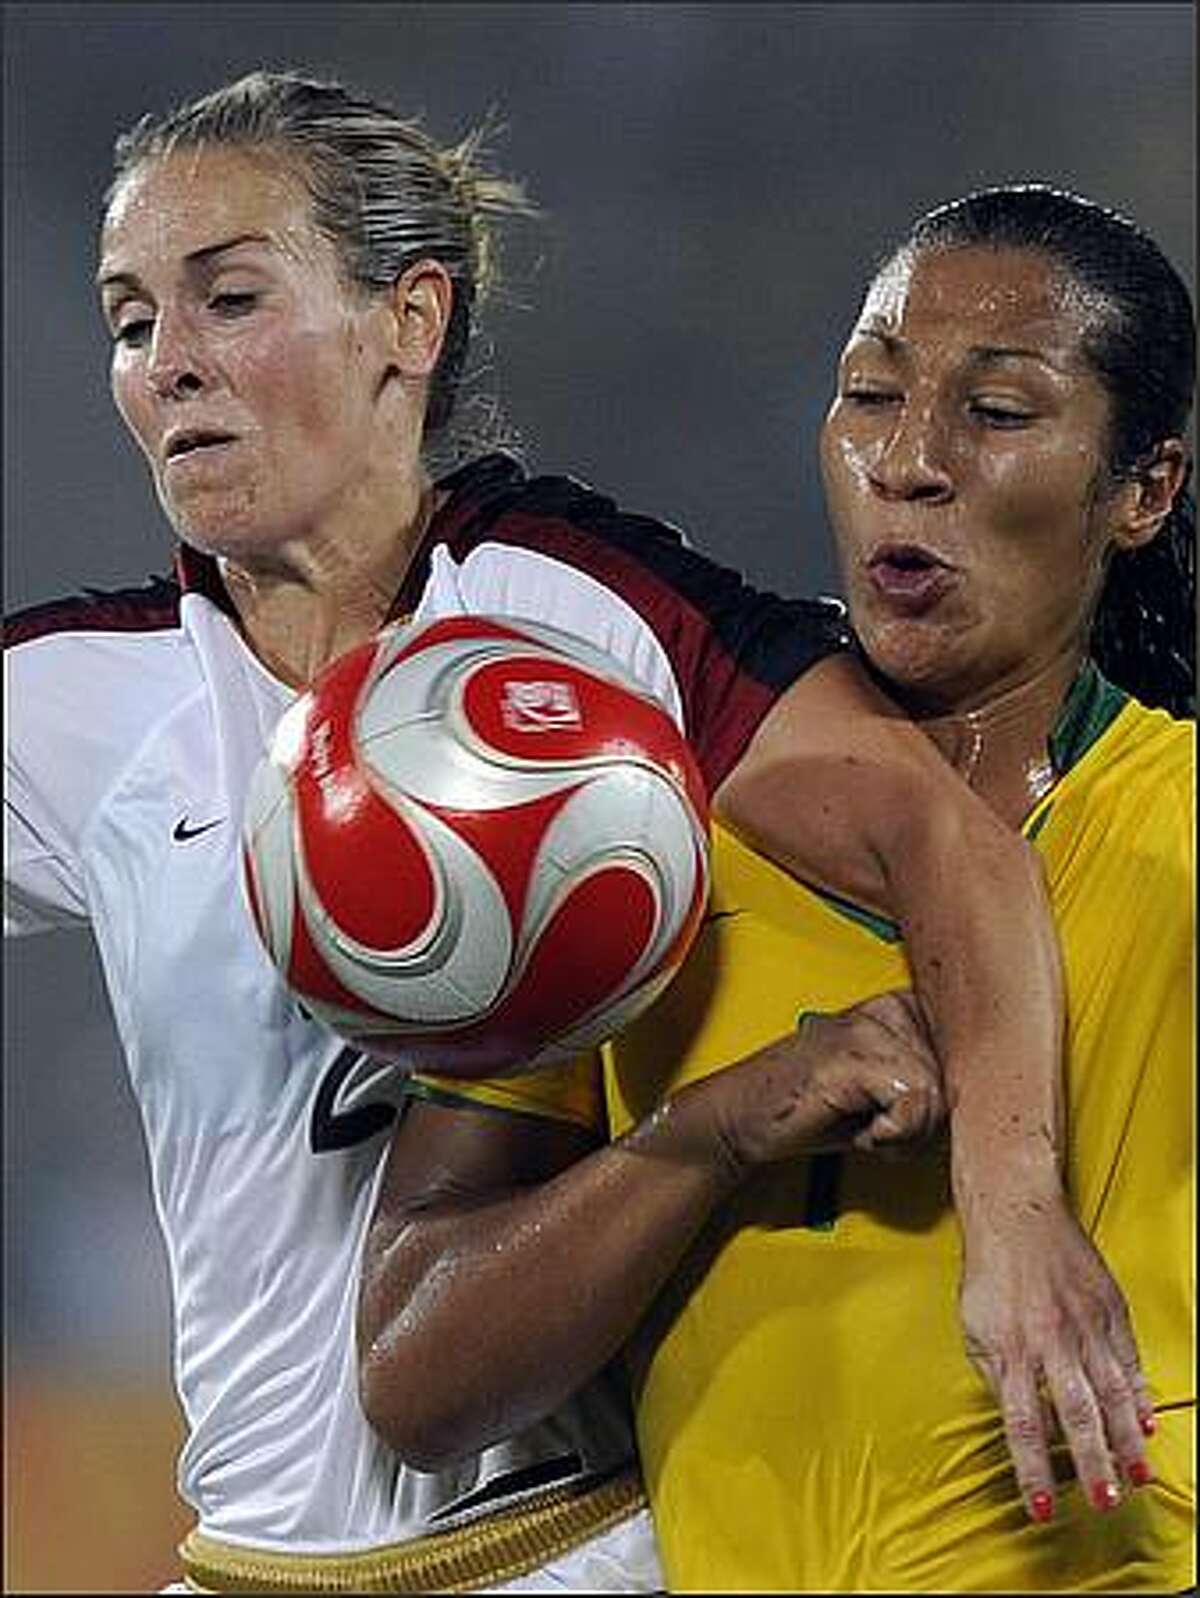 Daniela (R) of Brazil vies for the ball with Heather Mitts of US during the women's gold medal football match in the 2008 Beijing Olympic Games in Beijing.